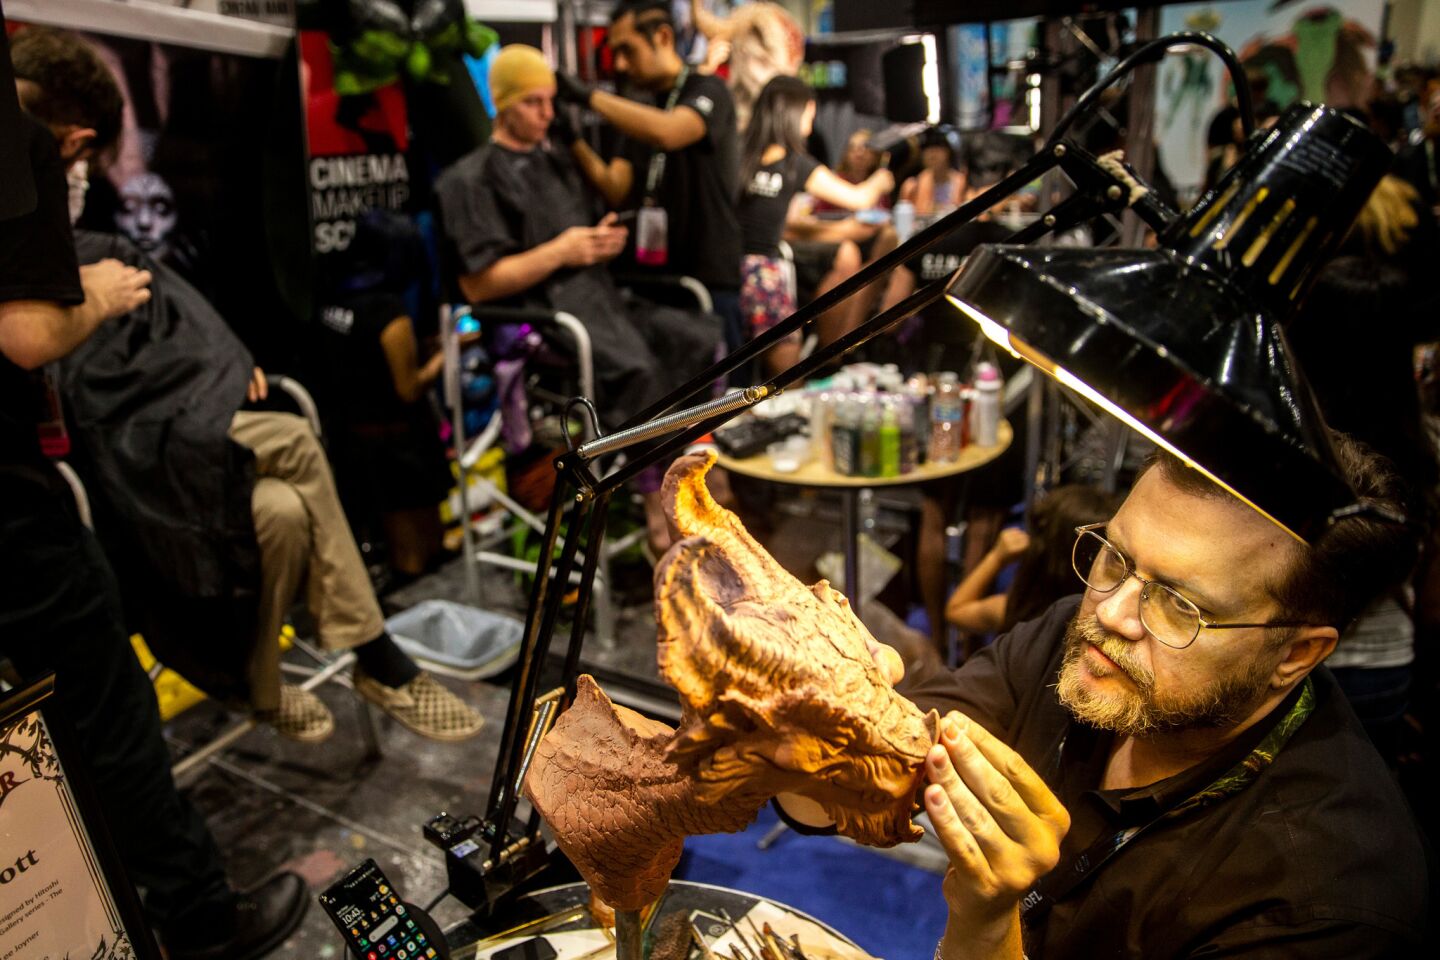 Lee Joyner demonstrates a sculpting technique at the Cinema Makeup School booth in Hall H during the first day of the 2018 San Diego Comic-Con International.